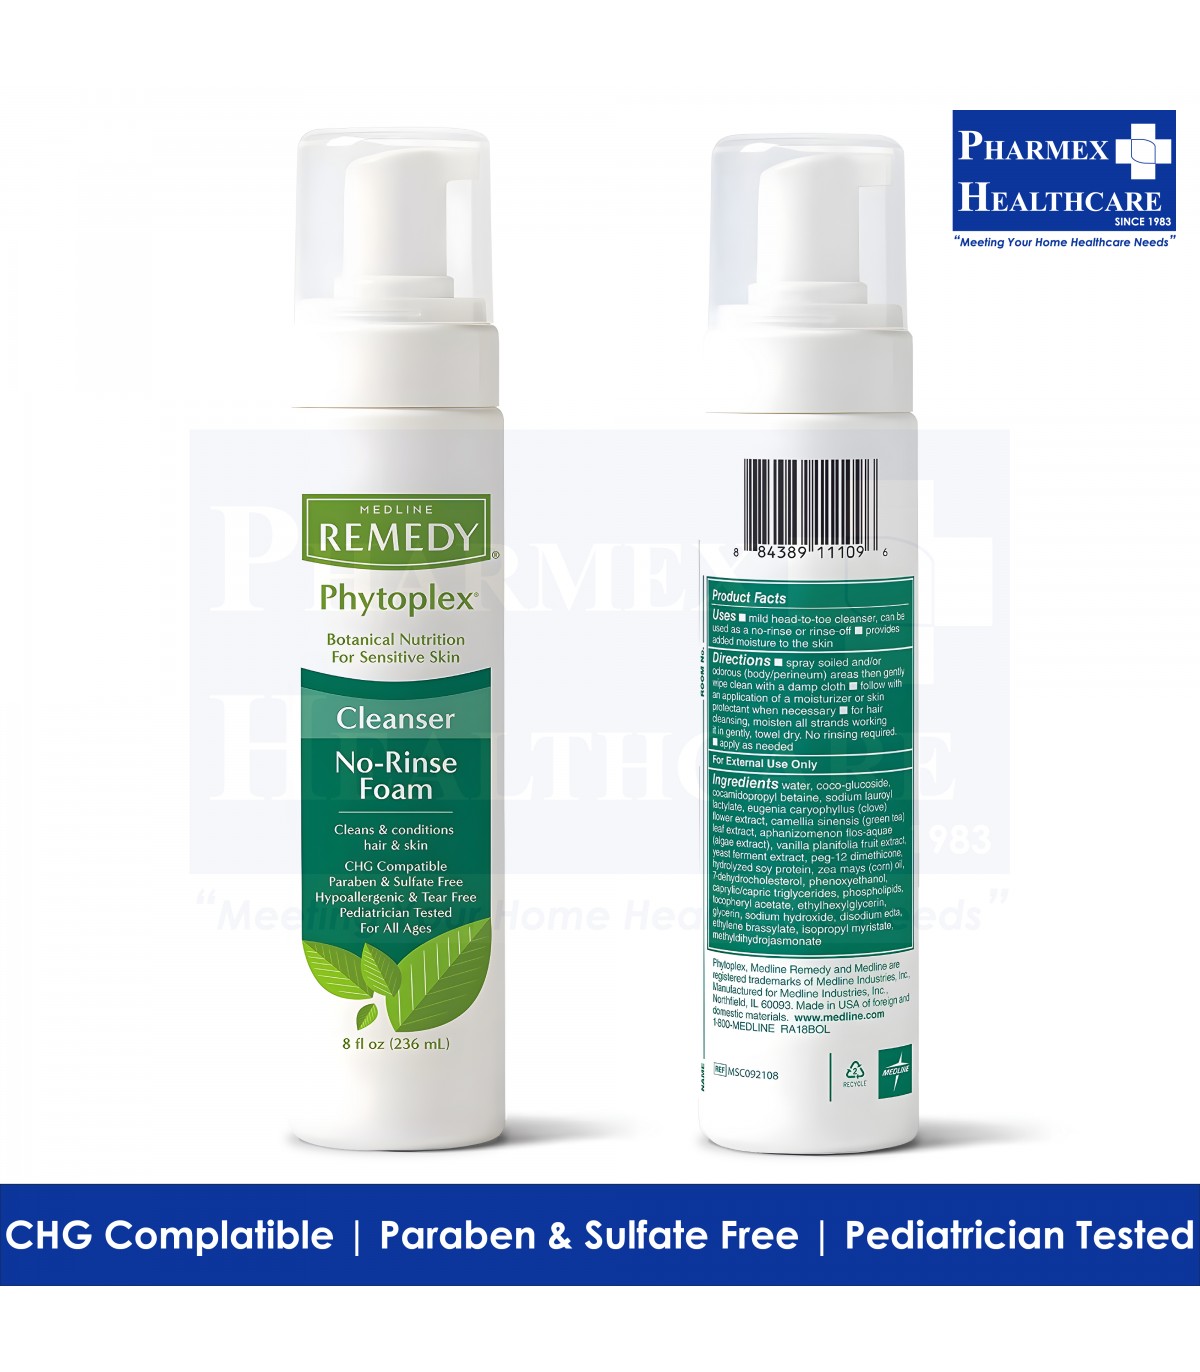 MEDLINE Remedy Phytoplex Hydrating No-Rinse Foam Cleanser Gentle Skin  and Hair Care Solution Pharmex Healthcare